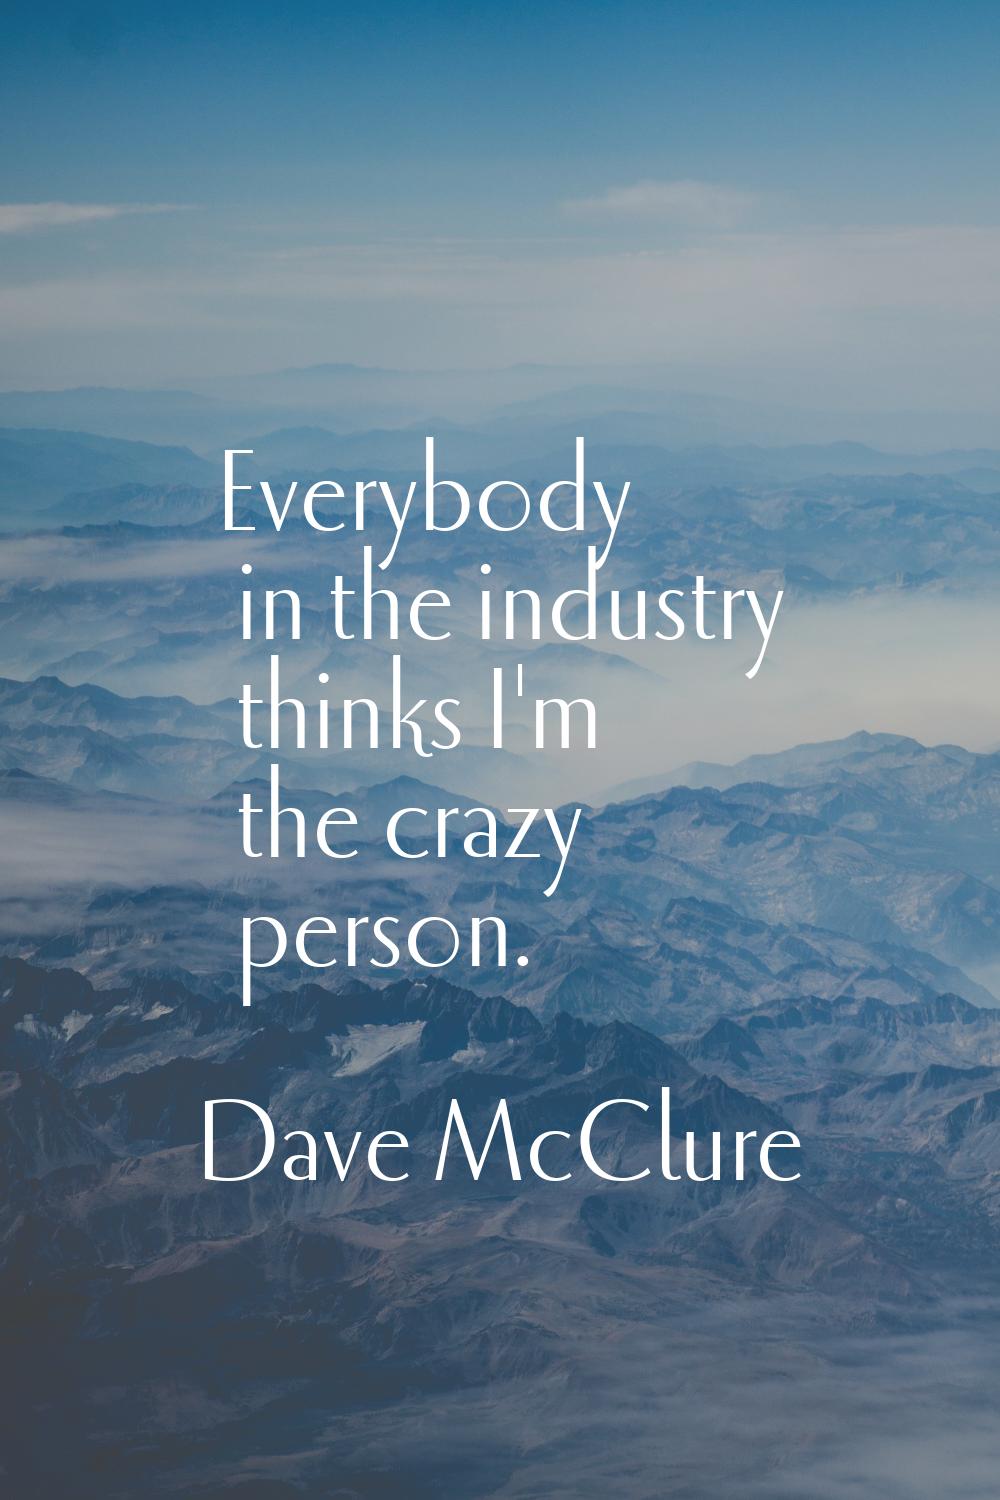 Everybody in the industry thinks I'm the crazy person.